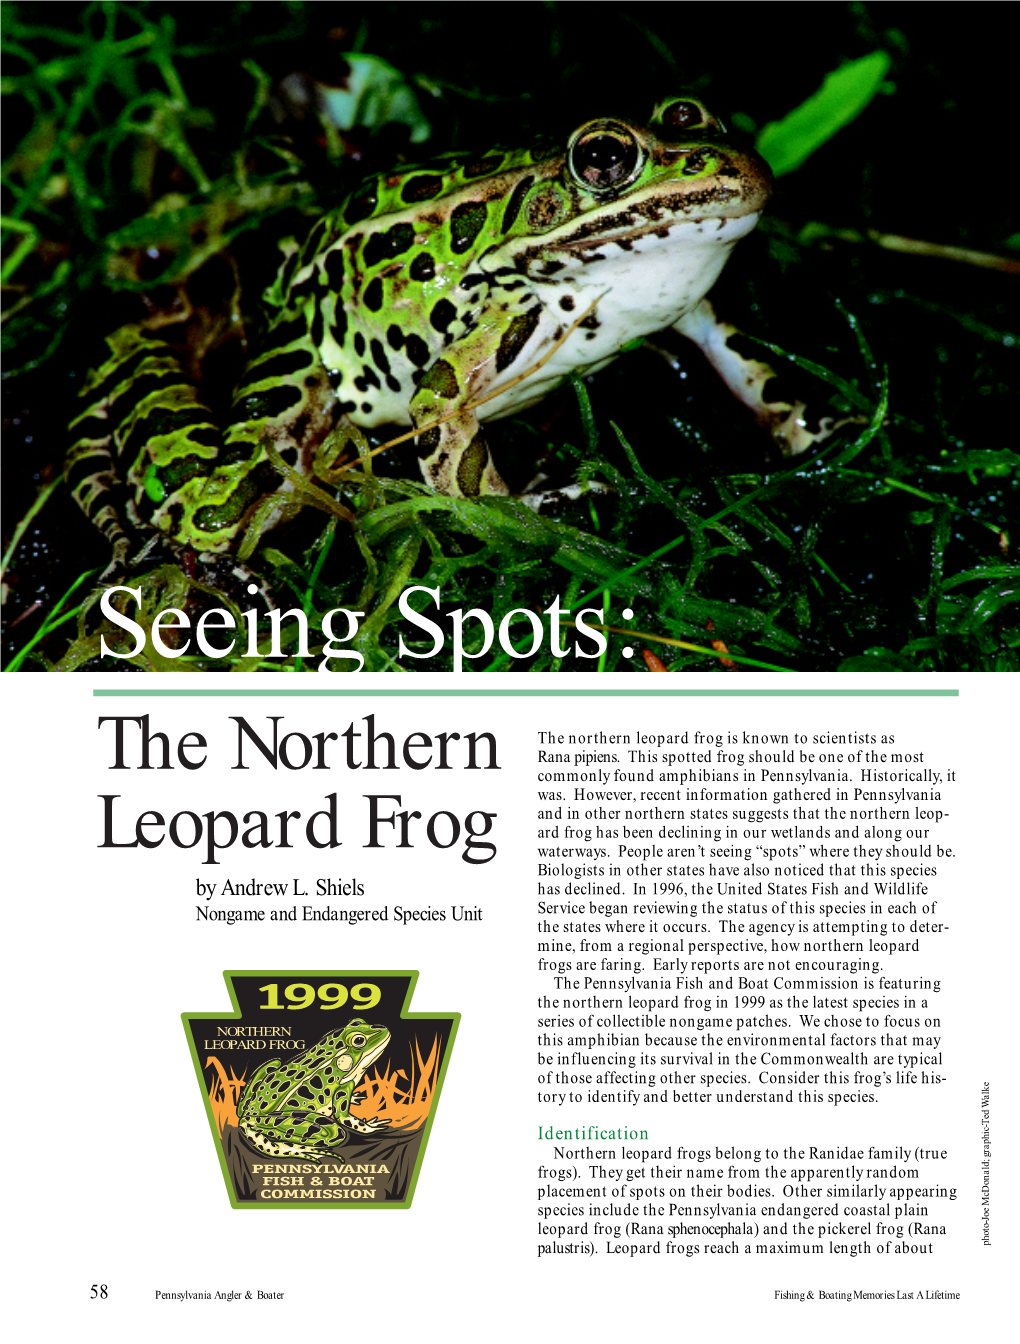 The Northern Leopard Frog Is Known to Scientists As the Northern Rana Pipiens